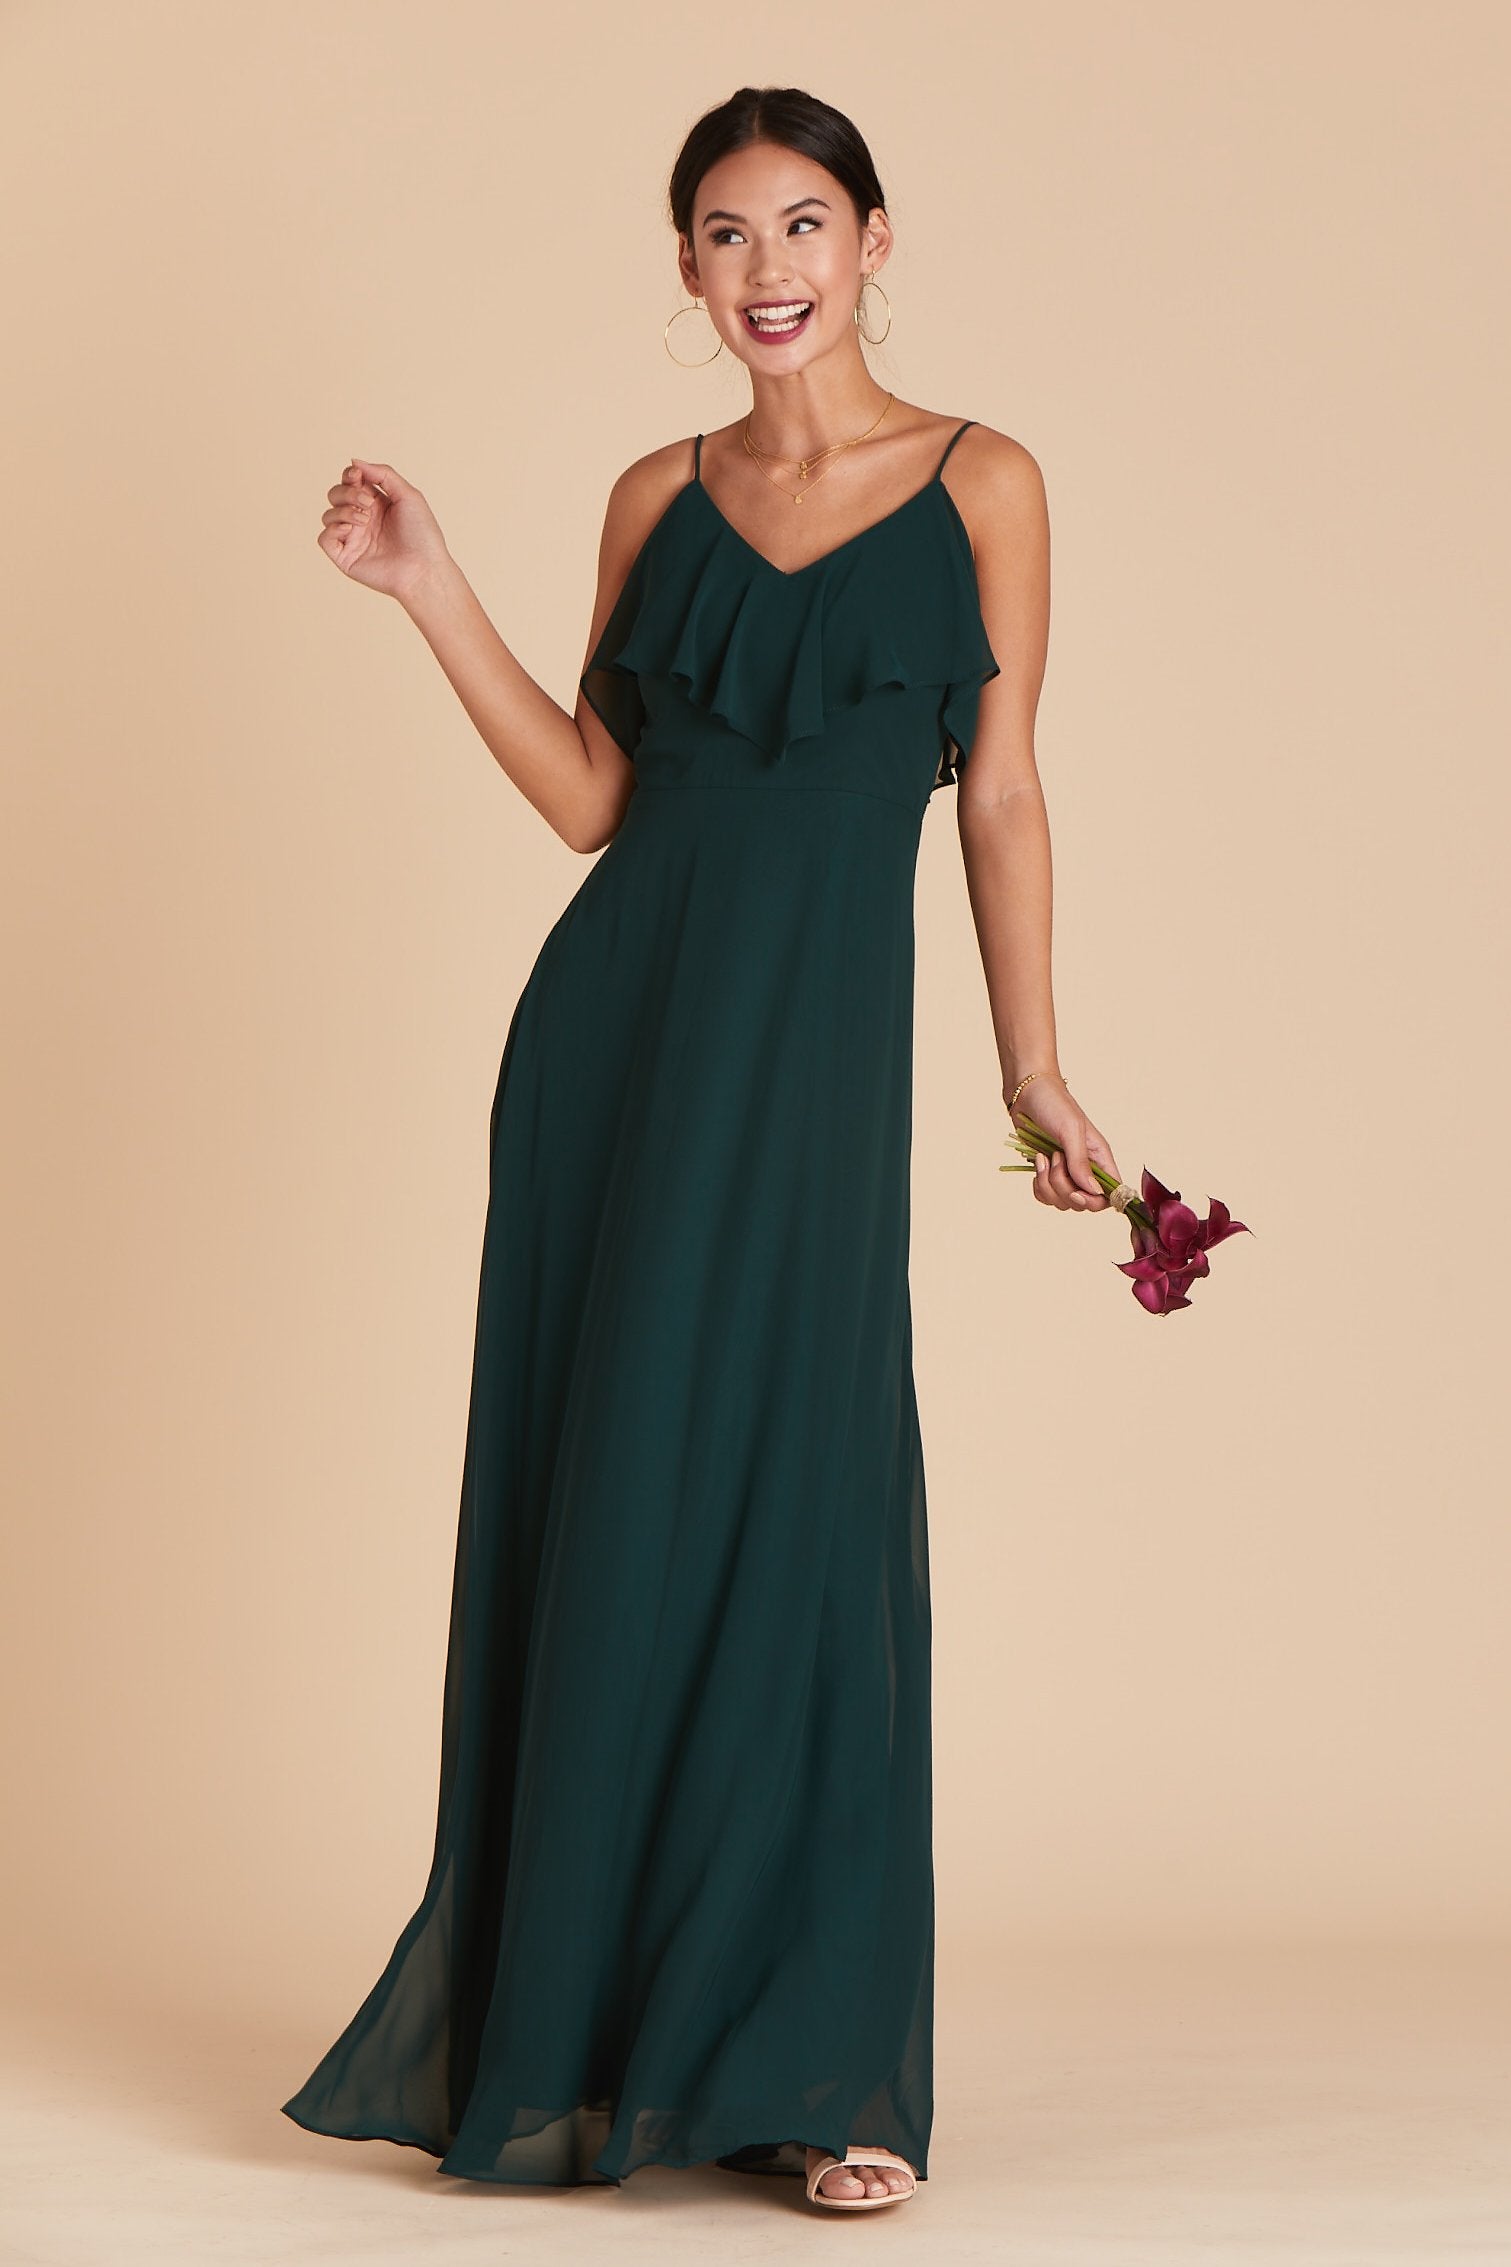 Jane convertible bridesmaid dress in emerald green chiffon by Birdy Grey, front view